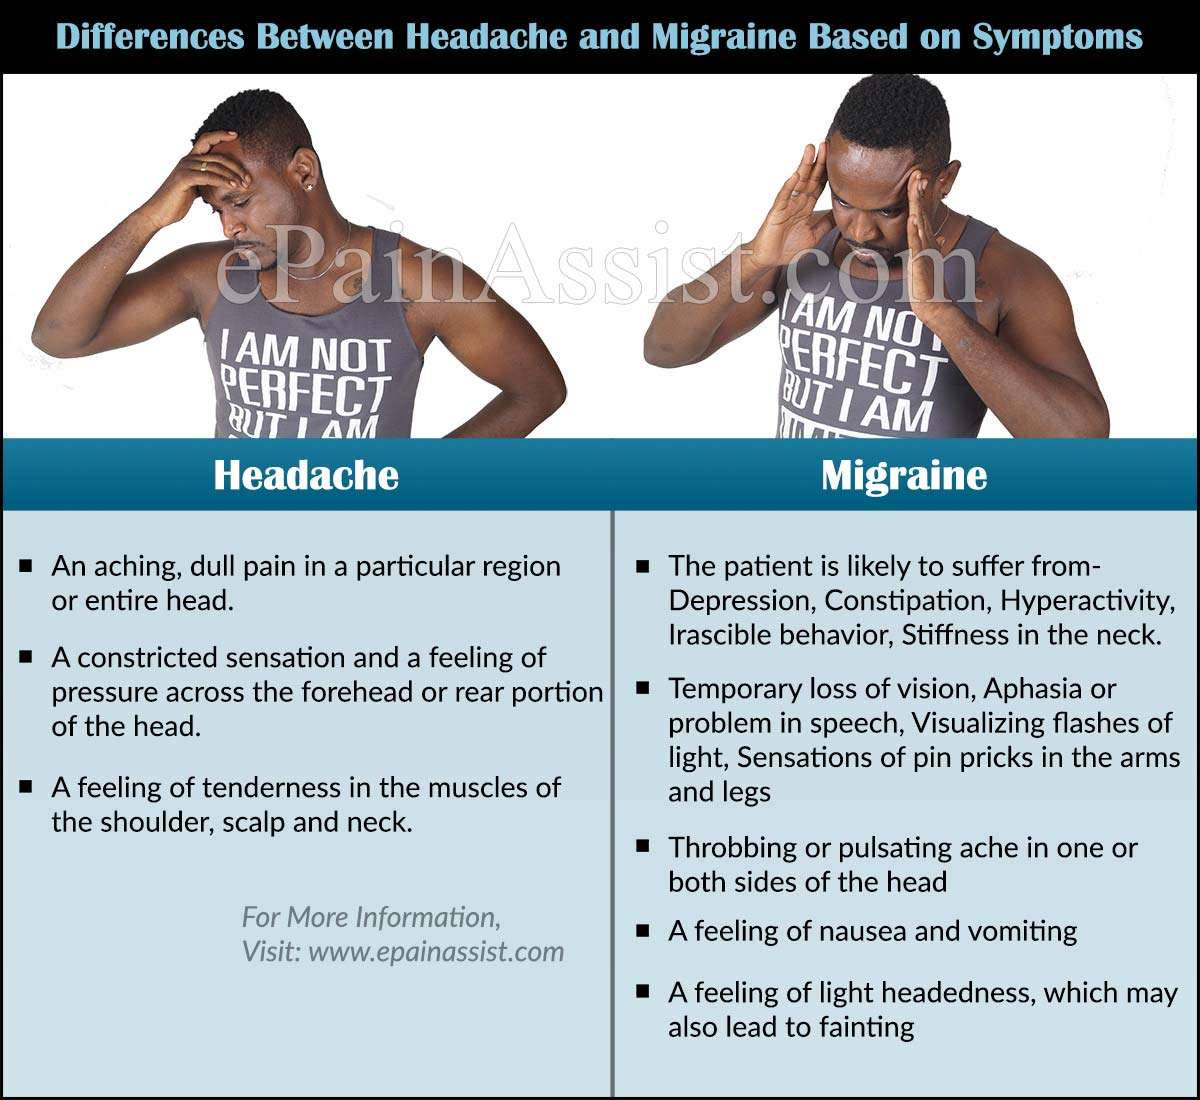 Headaches Vs. Migraine: Differences Worth Knowing